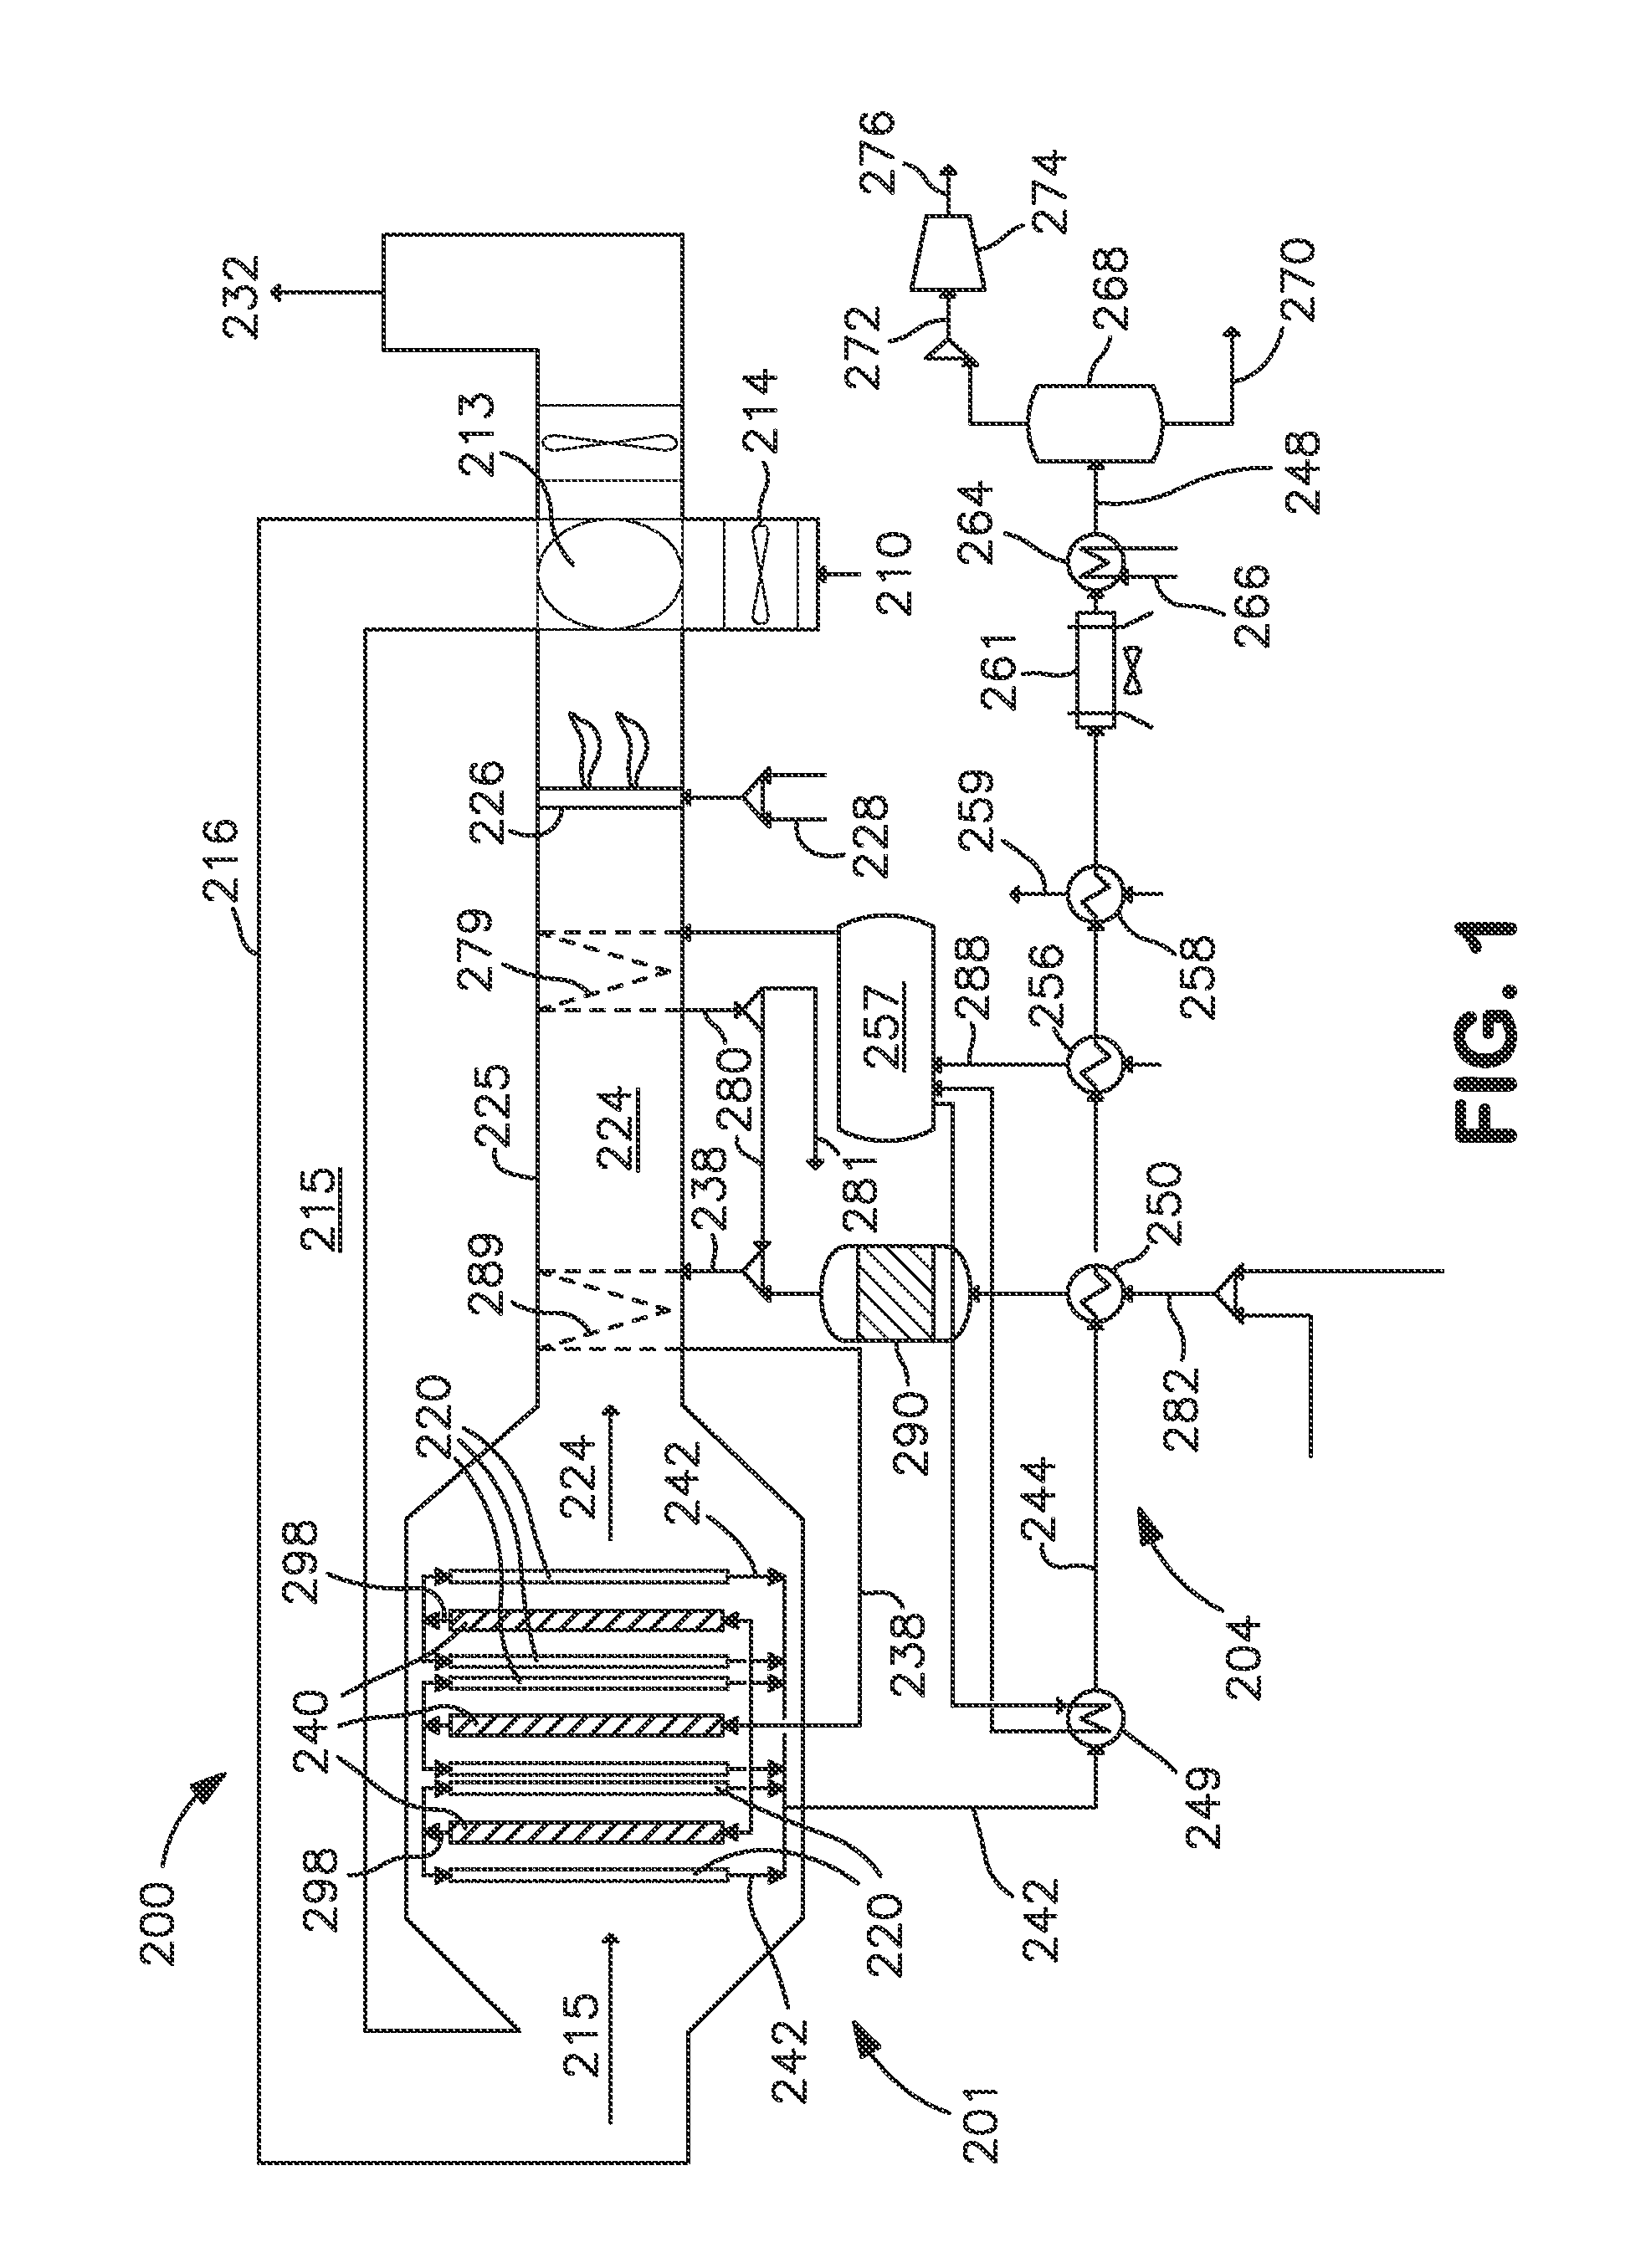 Method and system for producing a synthesis gas using an oxygen transport membrane based reforming system with secondary reforming